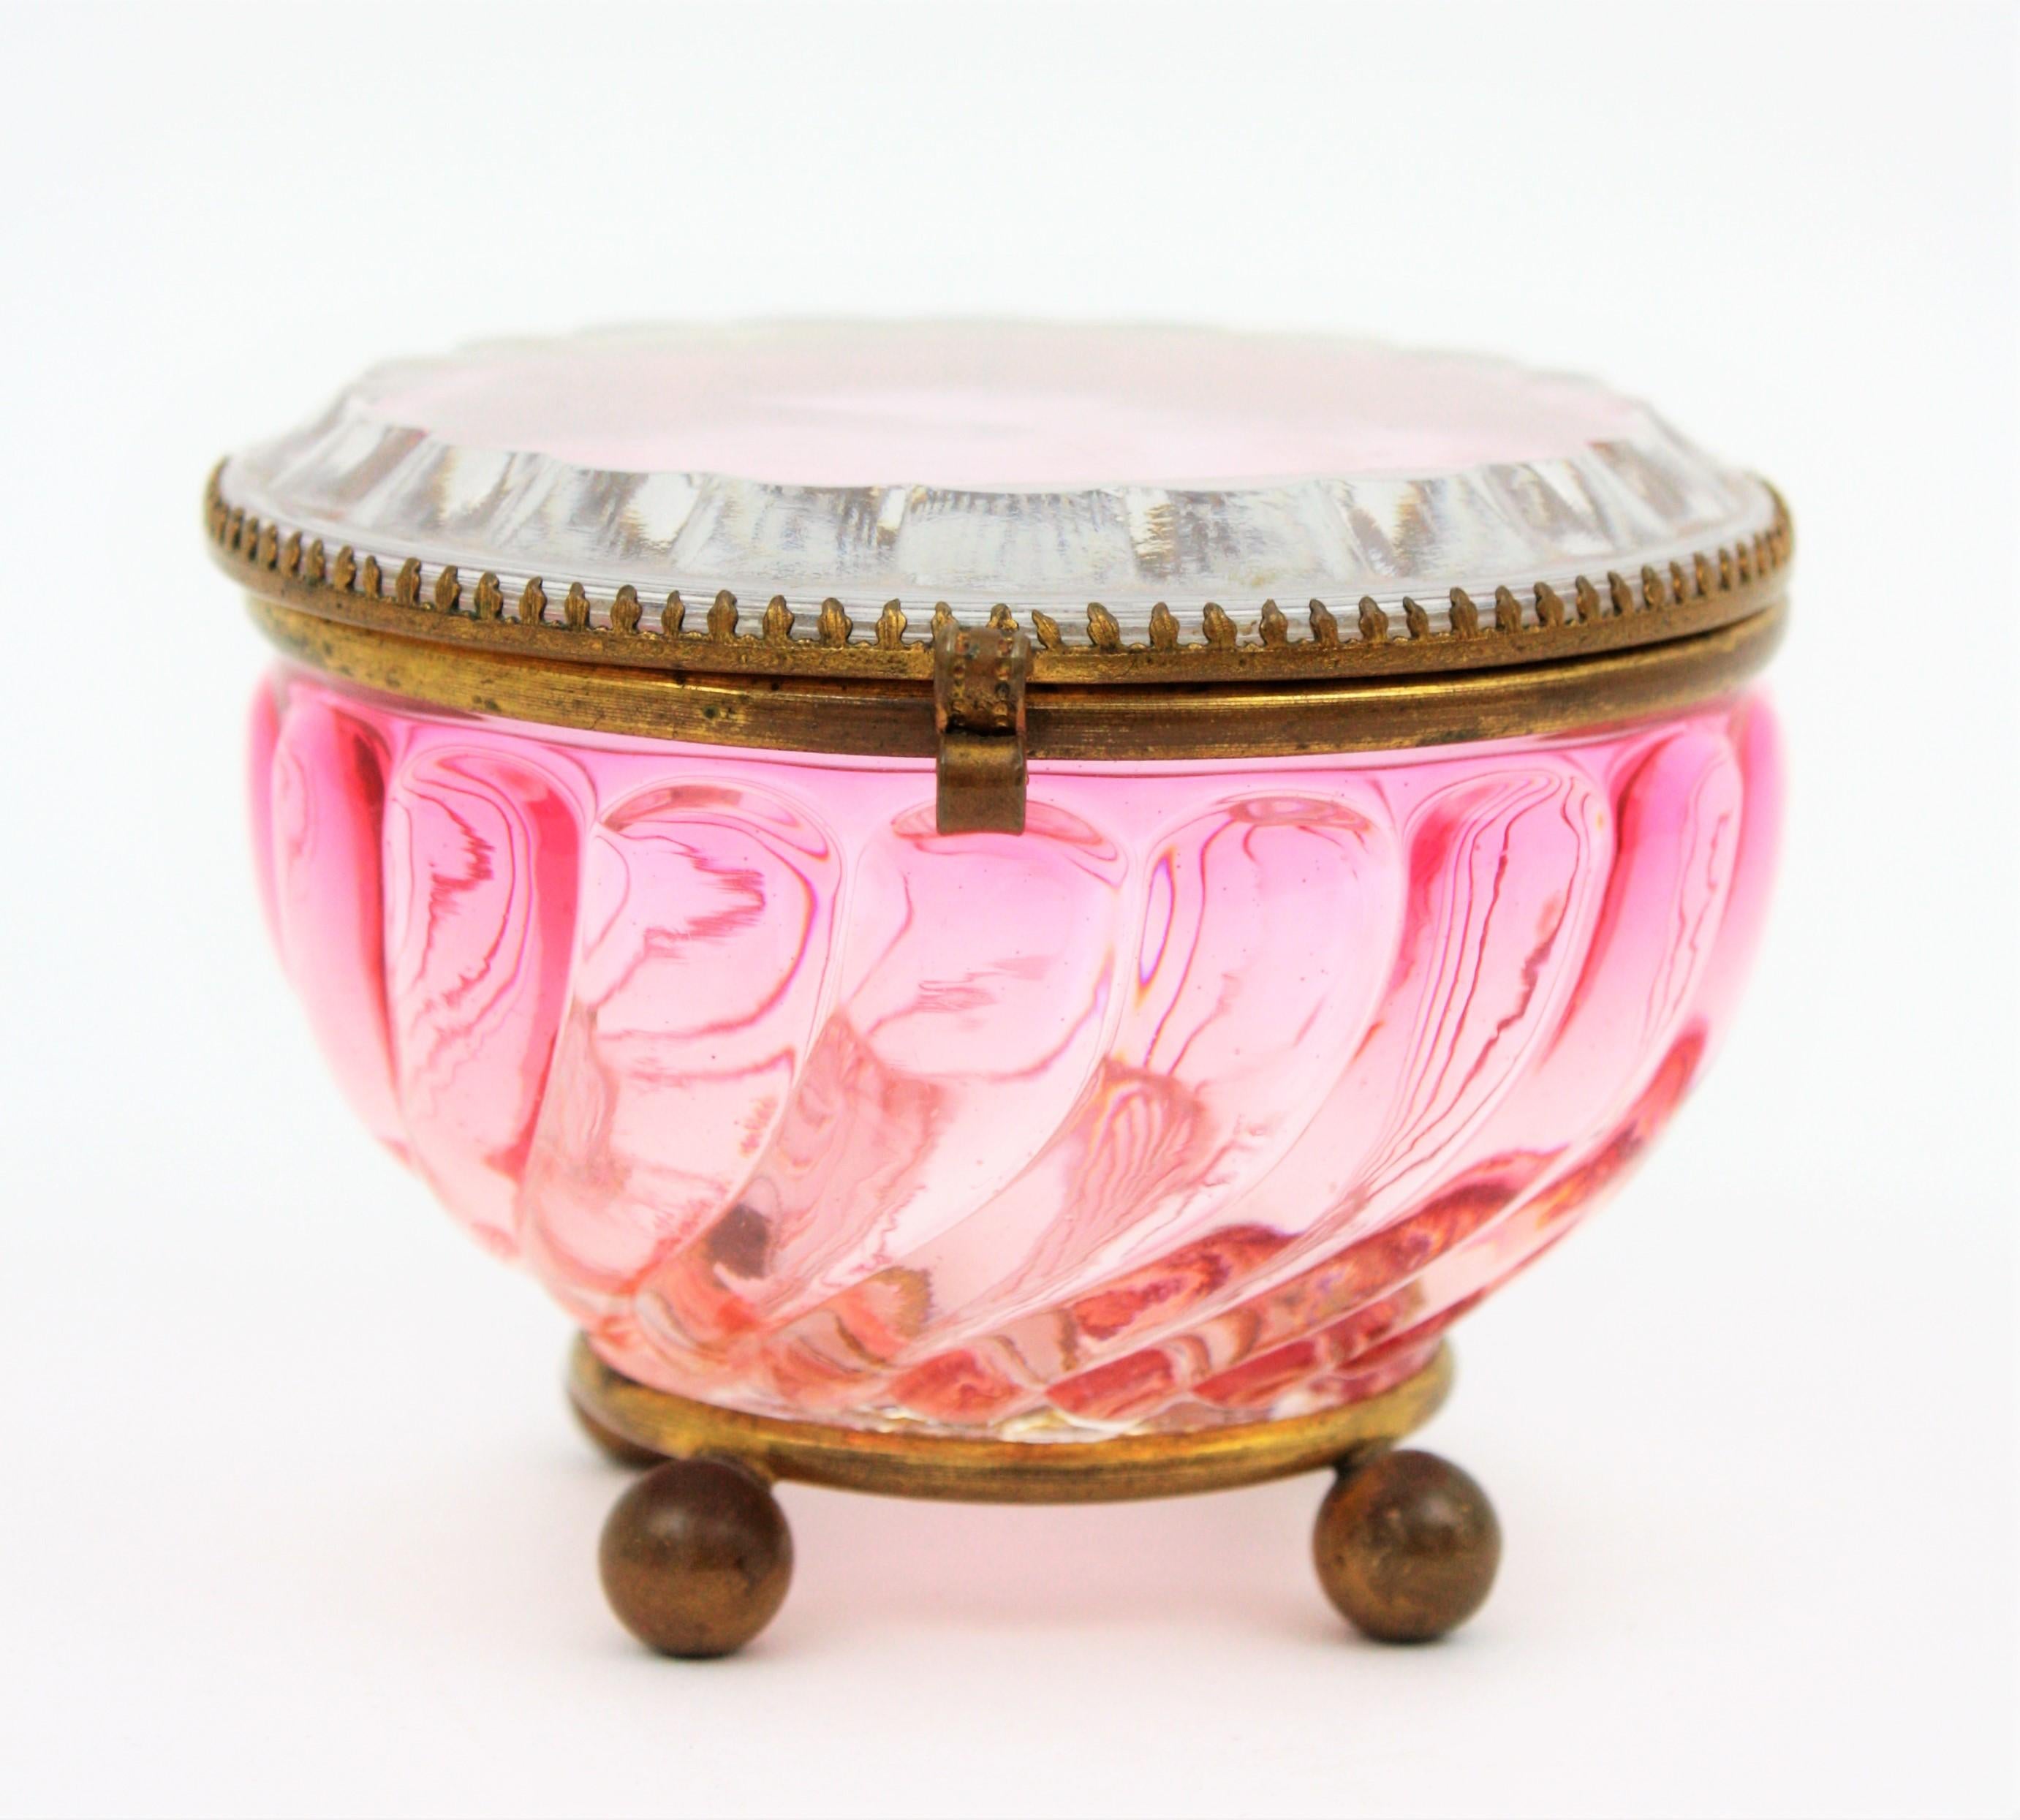 Exquisite Rose Teinte Amberina swirl jewelry box with brass details by Baccarat. France, 1920-1930s.
This lovely signed Baccarat crystal jewelry box in the Amberina Rose Teinte Swirled Bamboo patten features on a four-ball brass feet and it has an